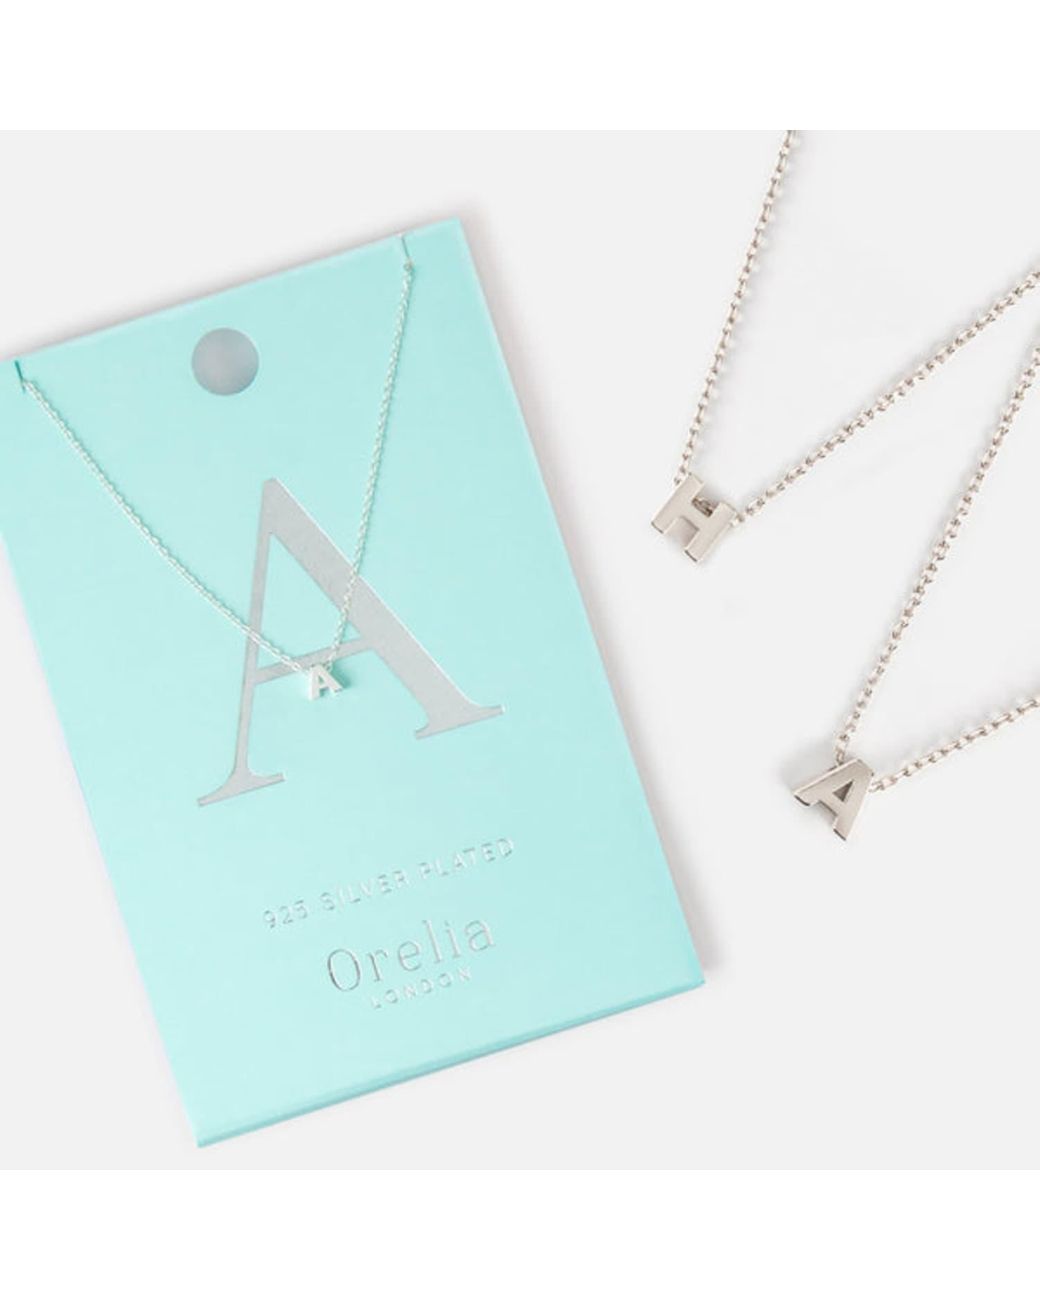 Orelia London Initial Necklace in Blue | Lyst